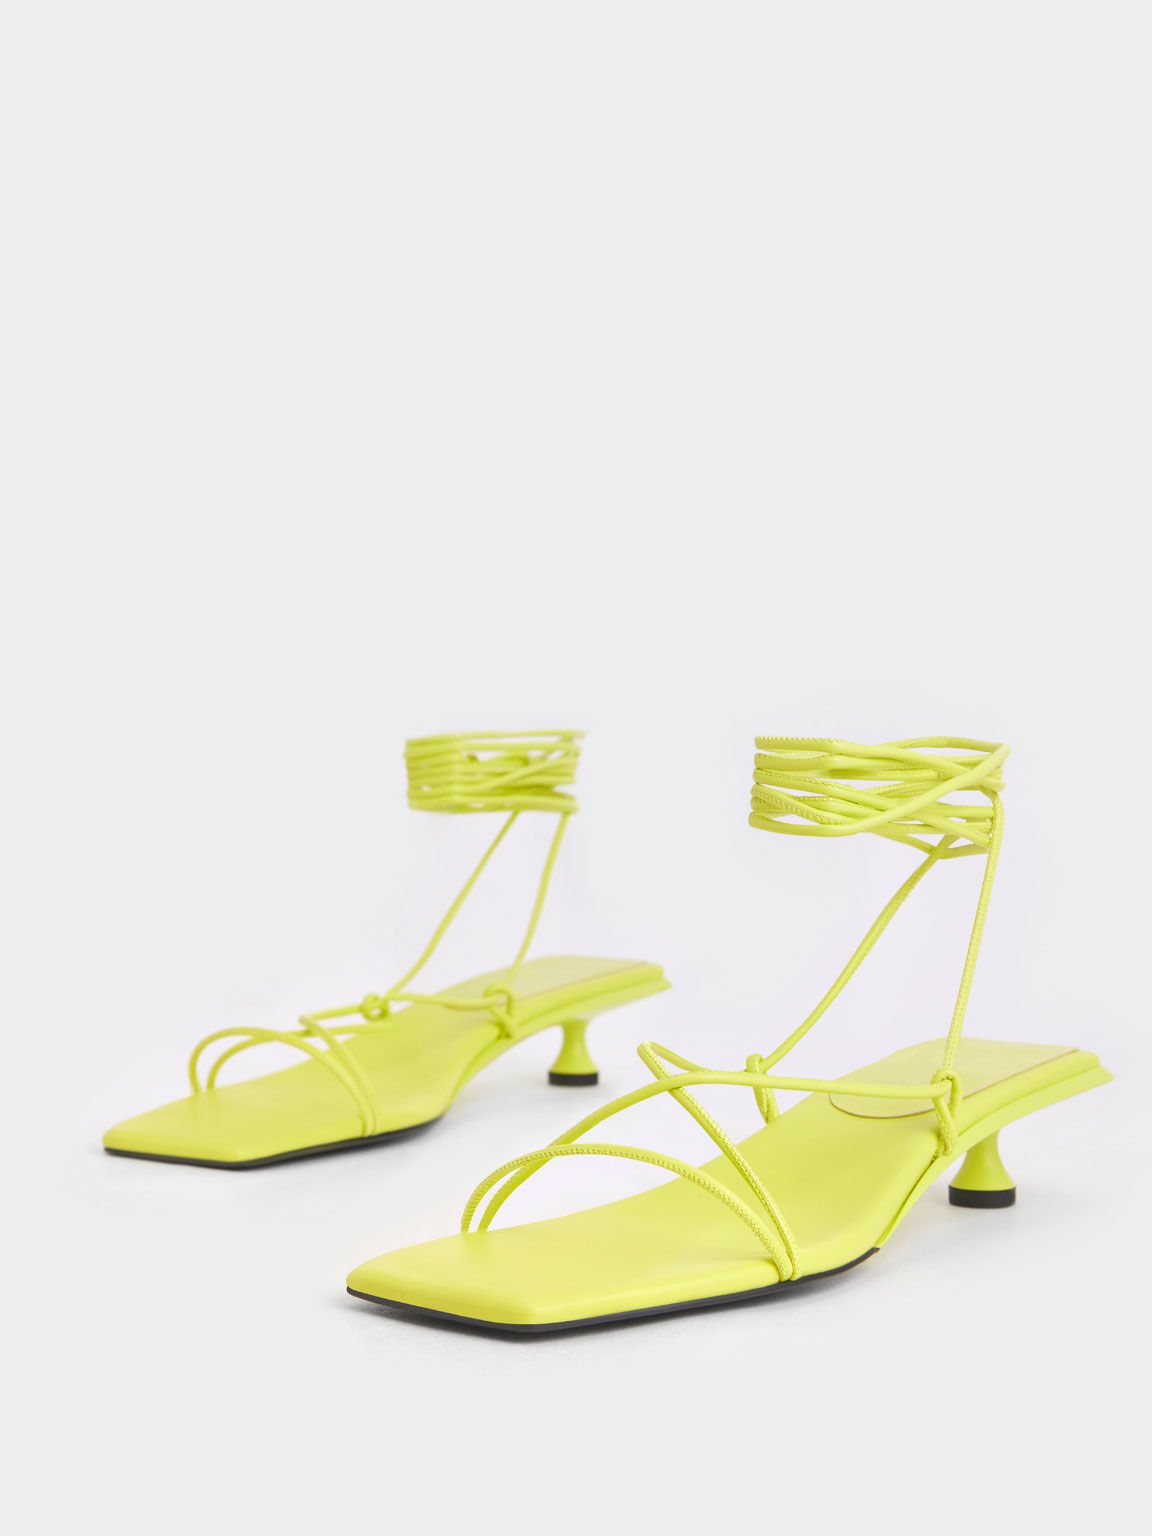 yellow strappy sandals